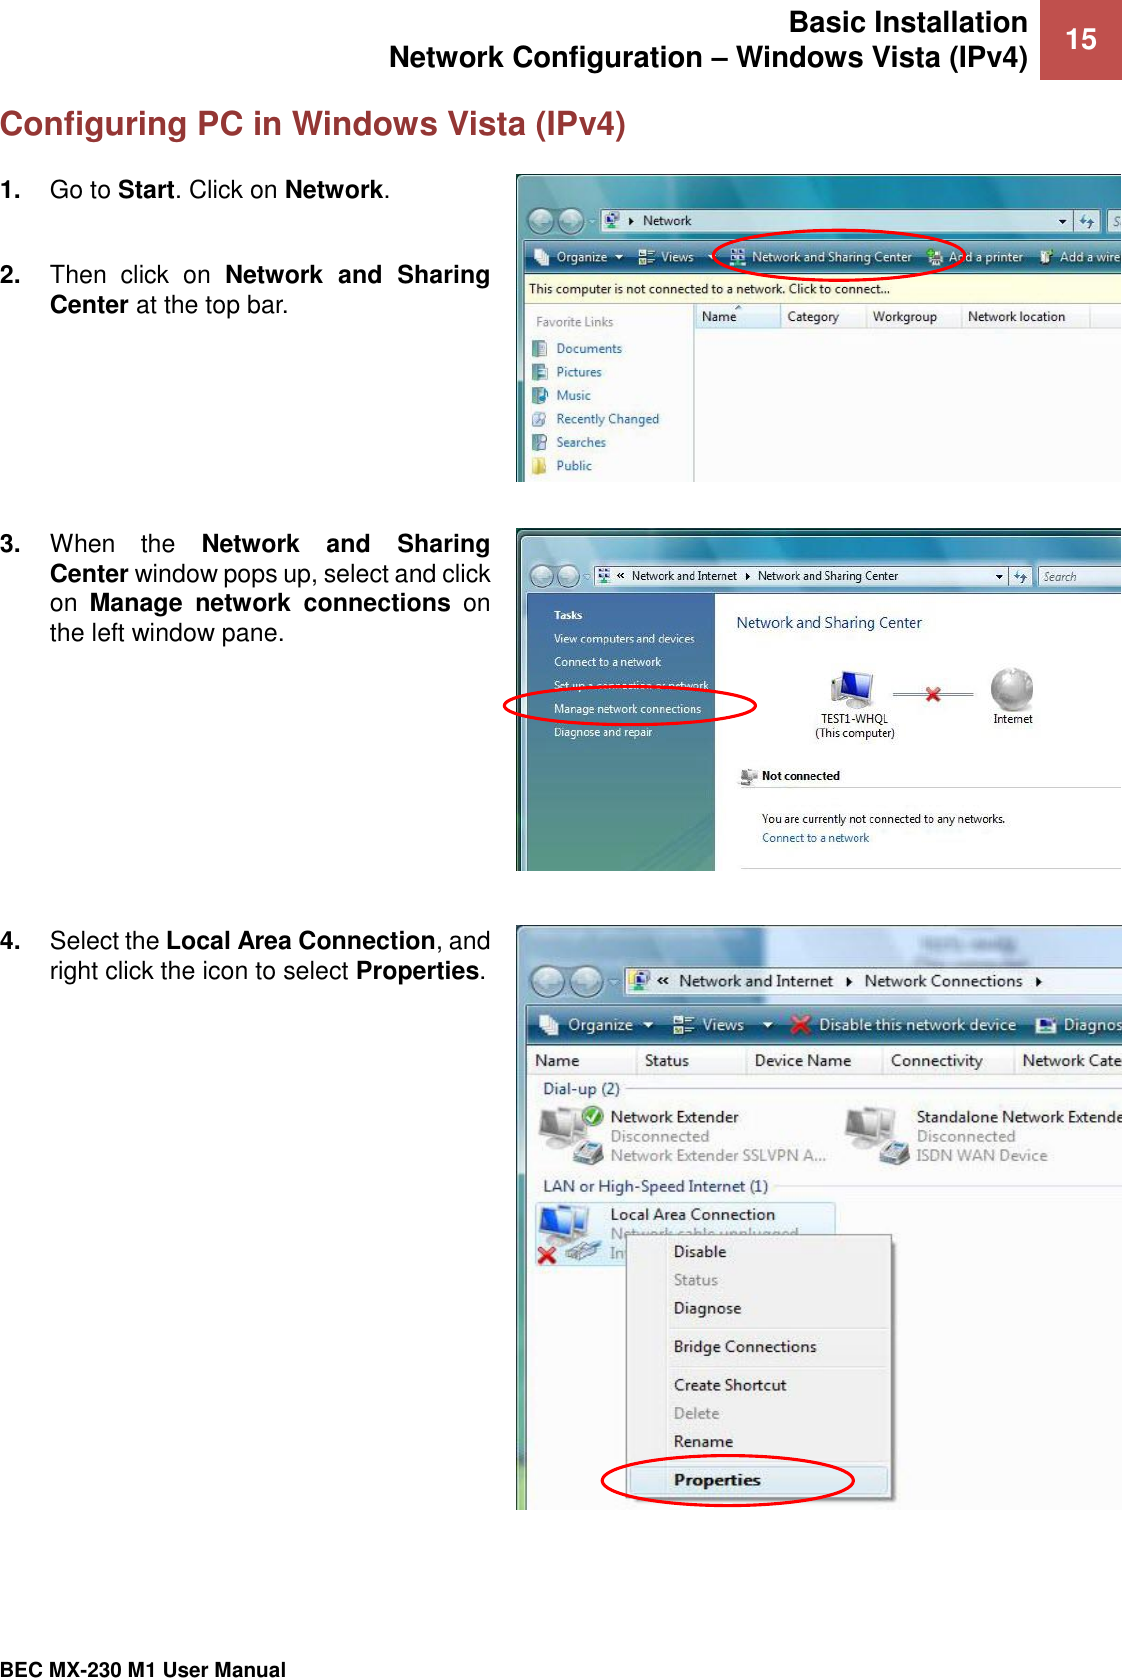 Basic Installation Network Configuration – Windows Vista (IPv4) 15   BEC MX-230 M1 User Manual  Configuring PC in Windows Vista (IPv4) 1. Go to Start. Click on Network.  2. Then  click  on  Network  and  Sharing Center at the top bar.  3. When  the  Network  and  Sharing Center window pops up, select and click on  Manage  network  connections on the left window pane.  4. Select the Local Area Connection, and right click the icon to select Properties.  